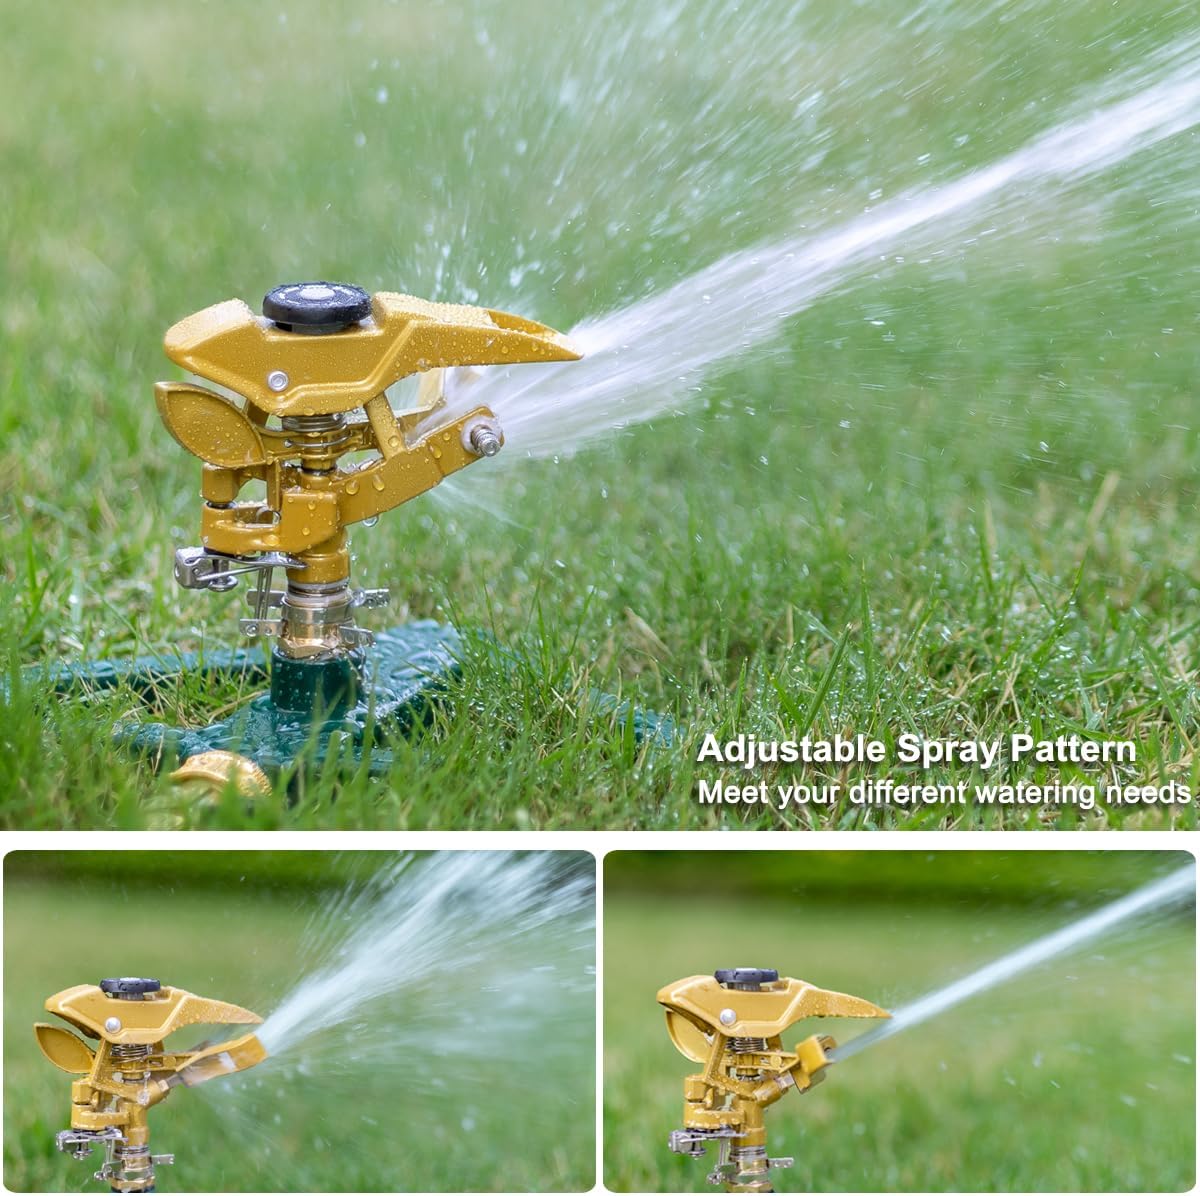 FANHAO Heavy Duty Pulsating Impact Lawn Sprinkler with Metal Base